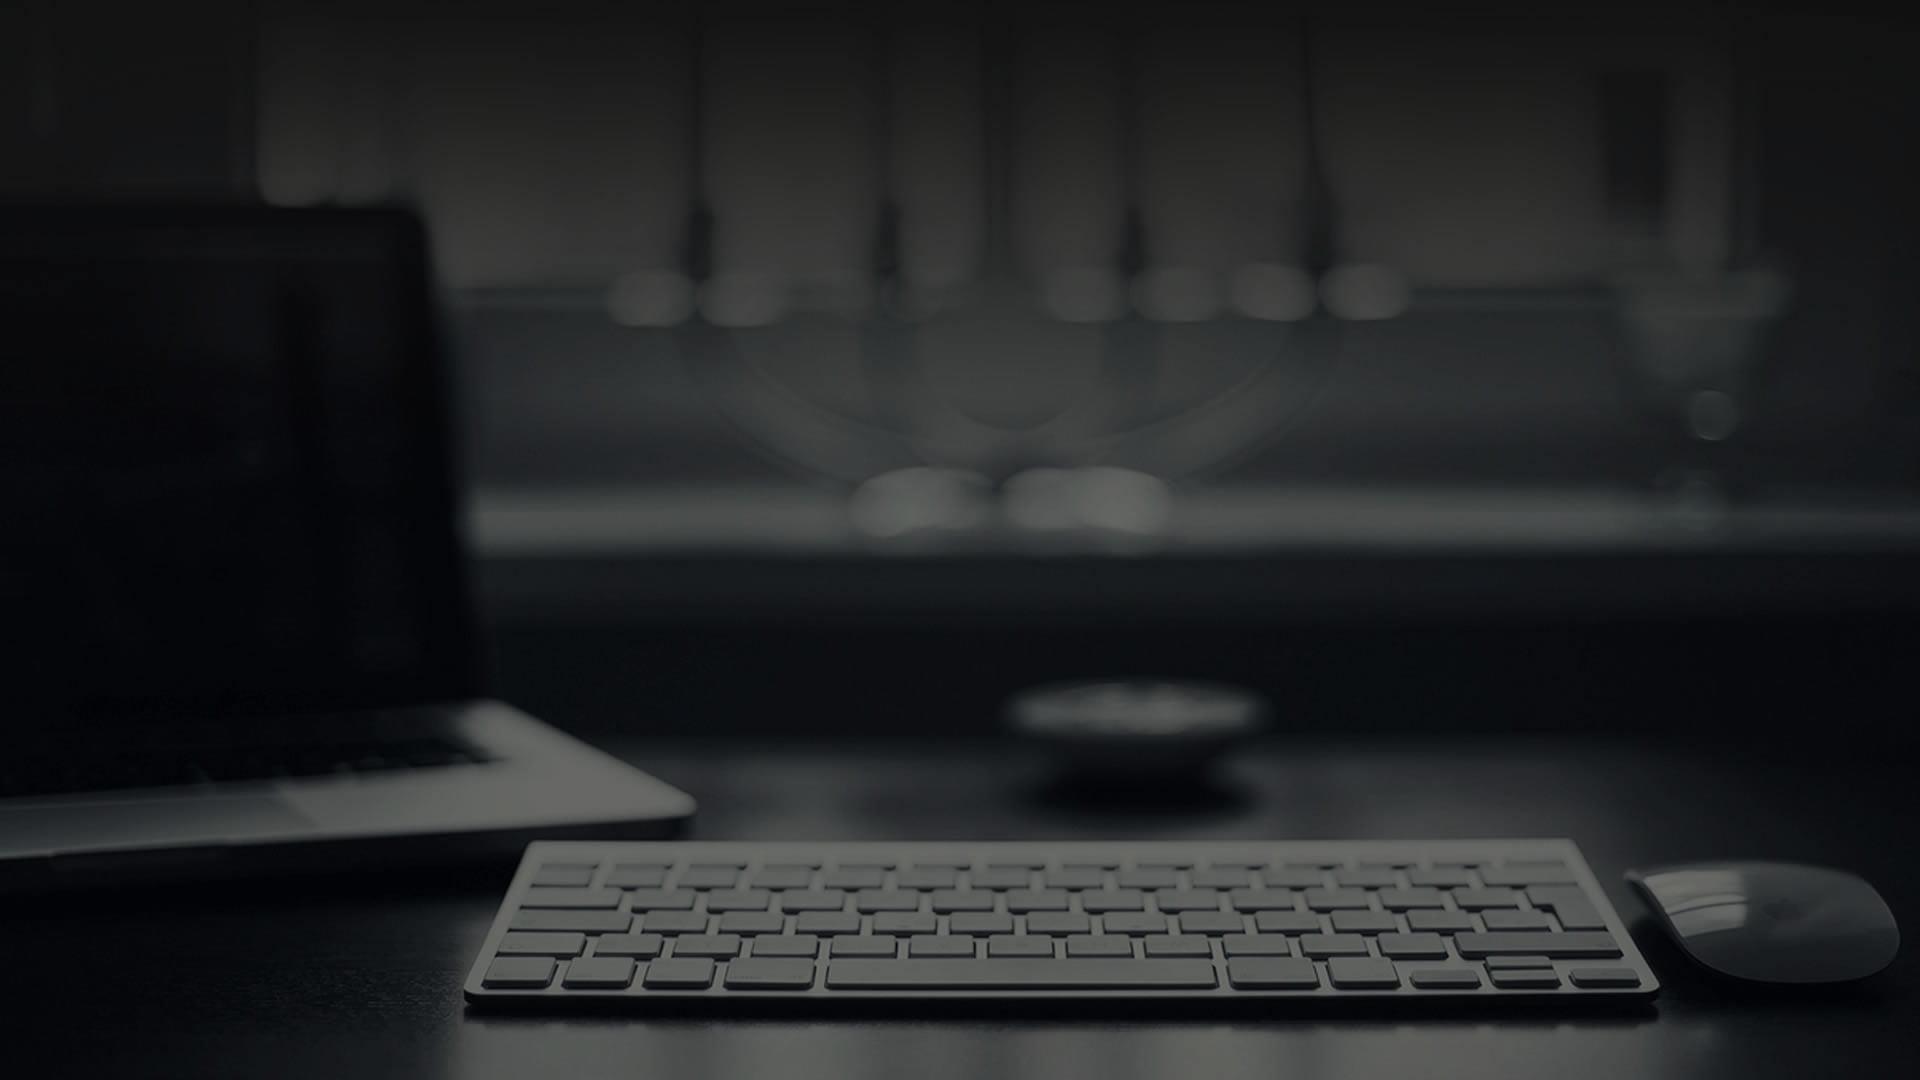 HD wallpaper: black and gray laptop computer, cityscape